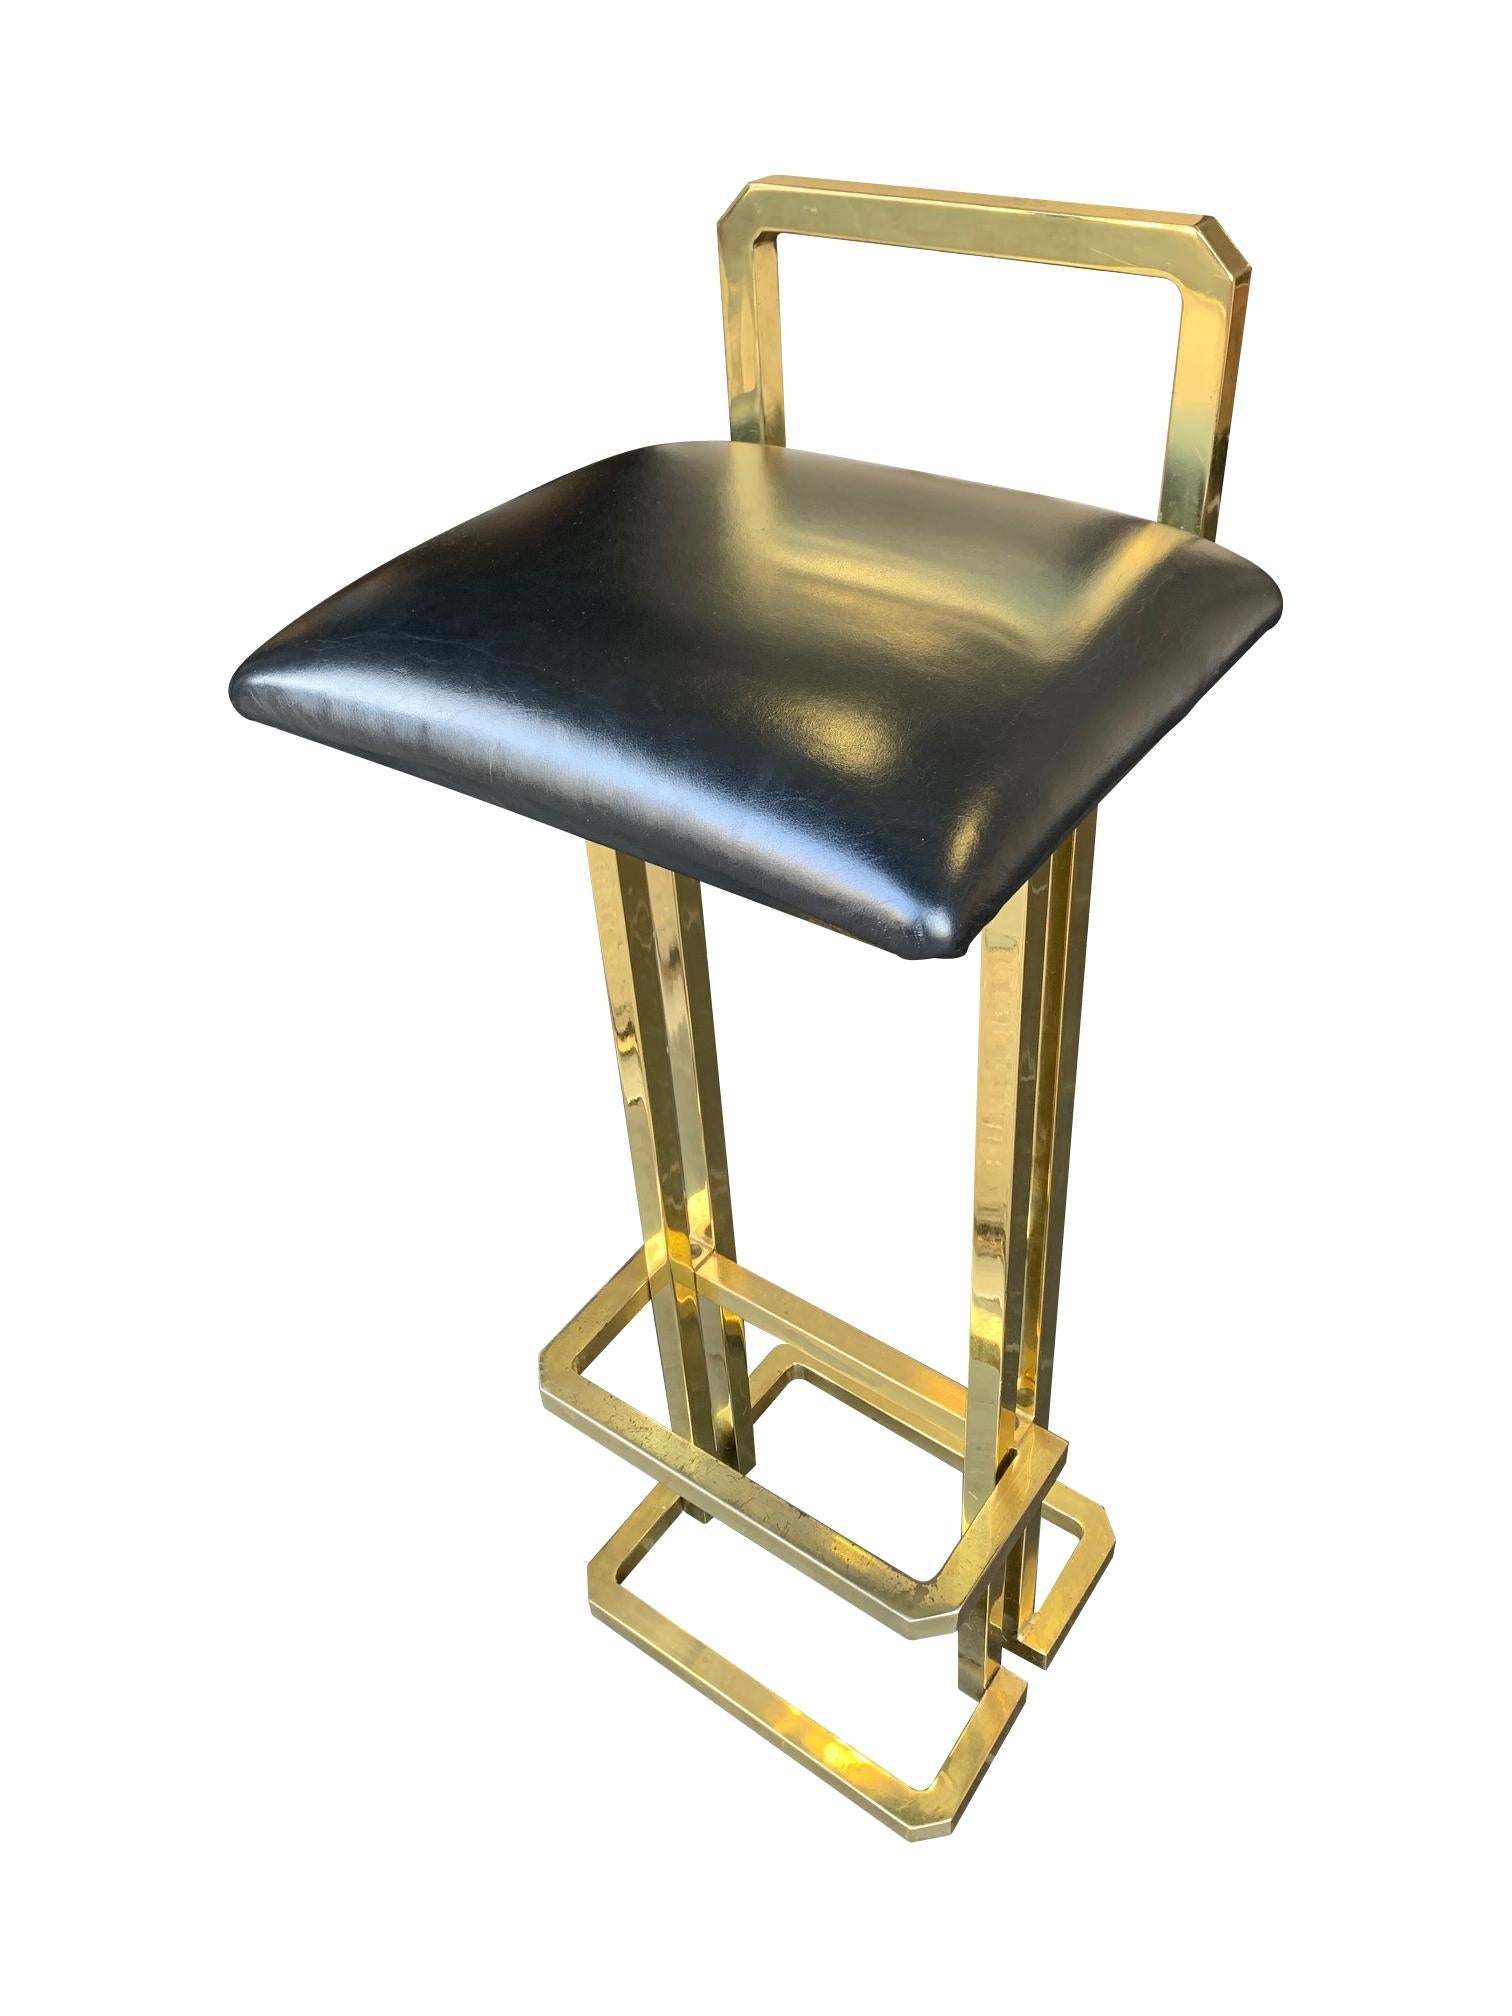 Set of 3 Maison Jansen Style Gilt Metal Stools with Black Leather Seat Pads For Sale 6